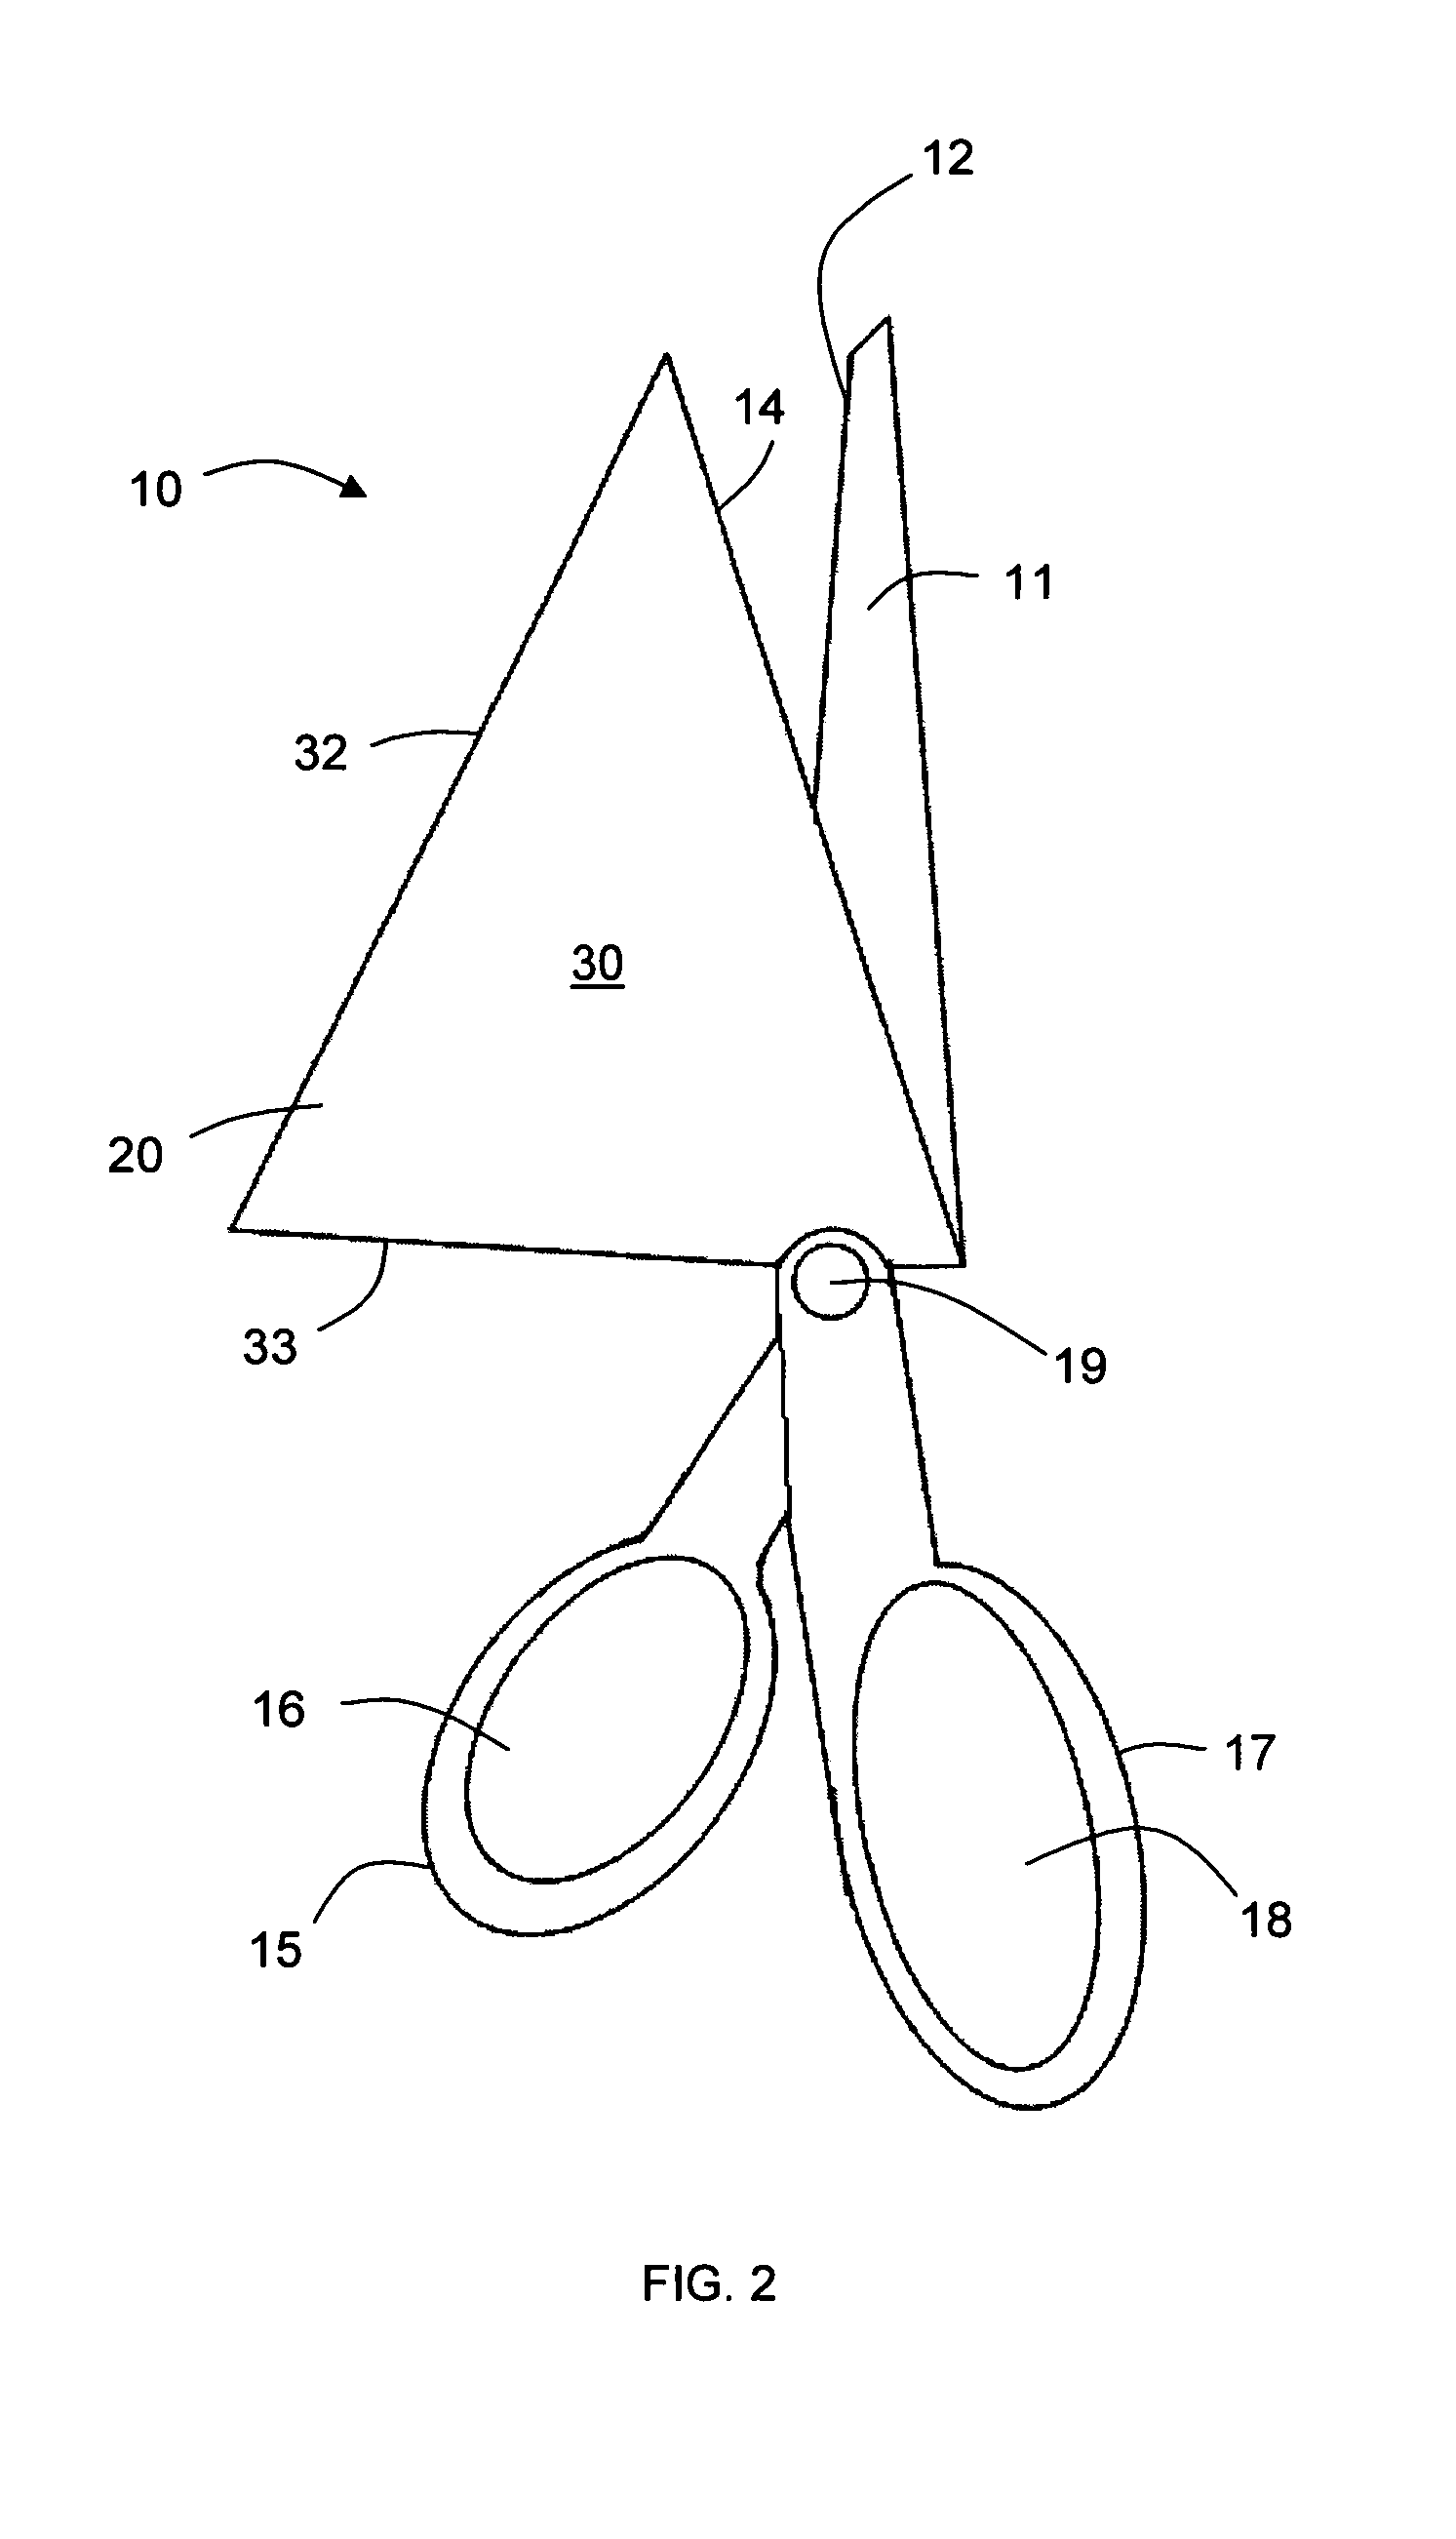 Pizza cutting and serving device